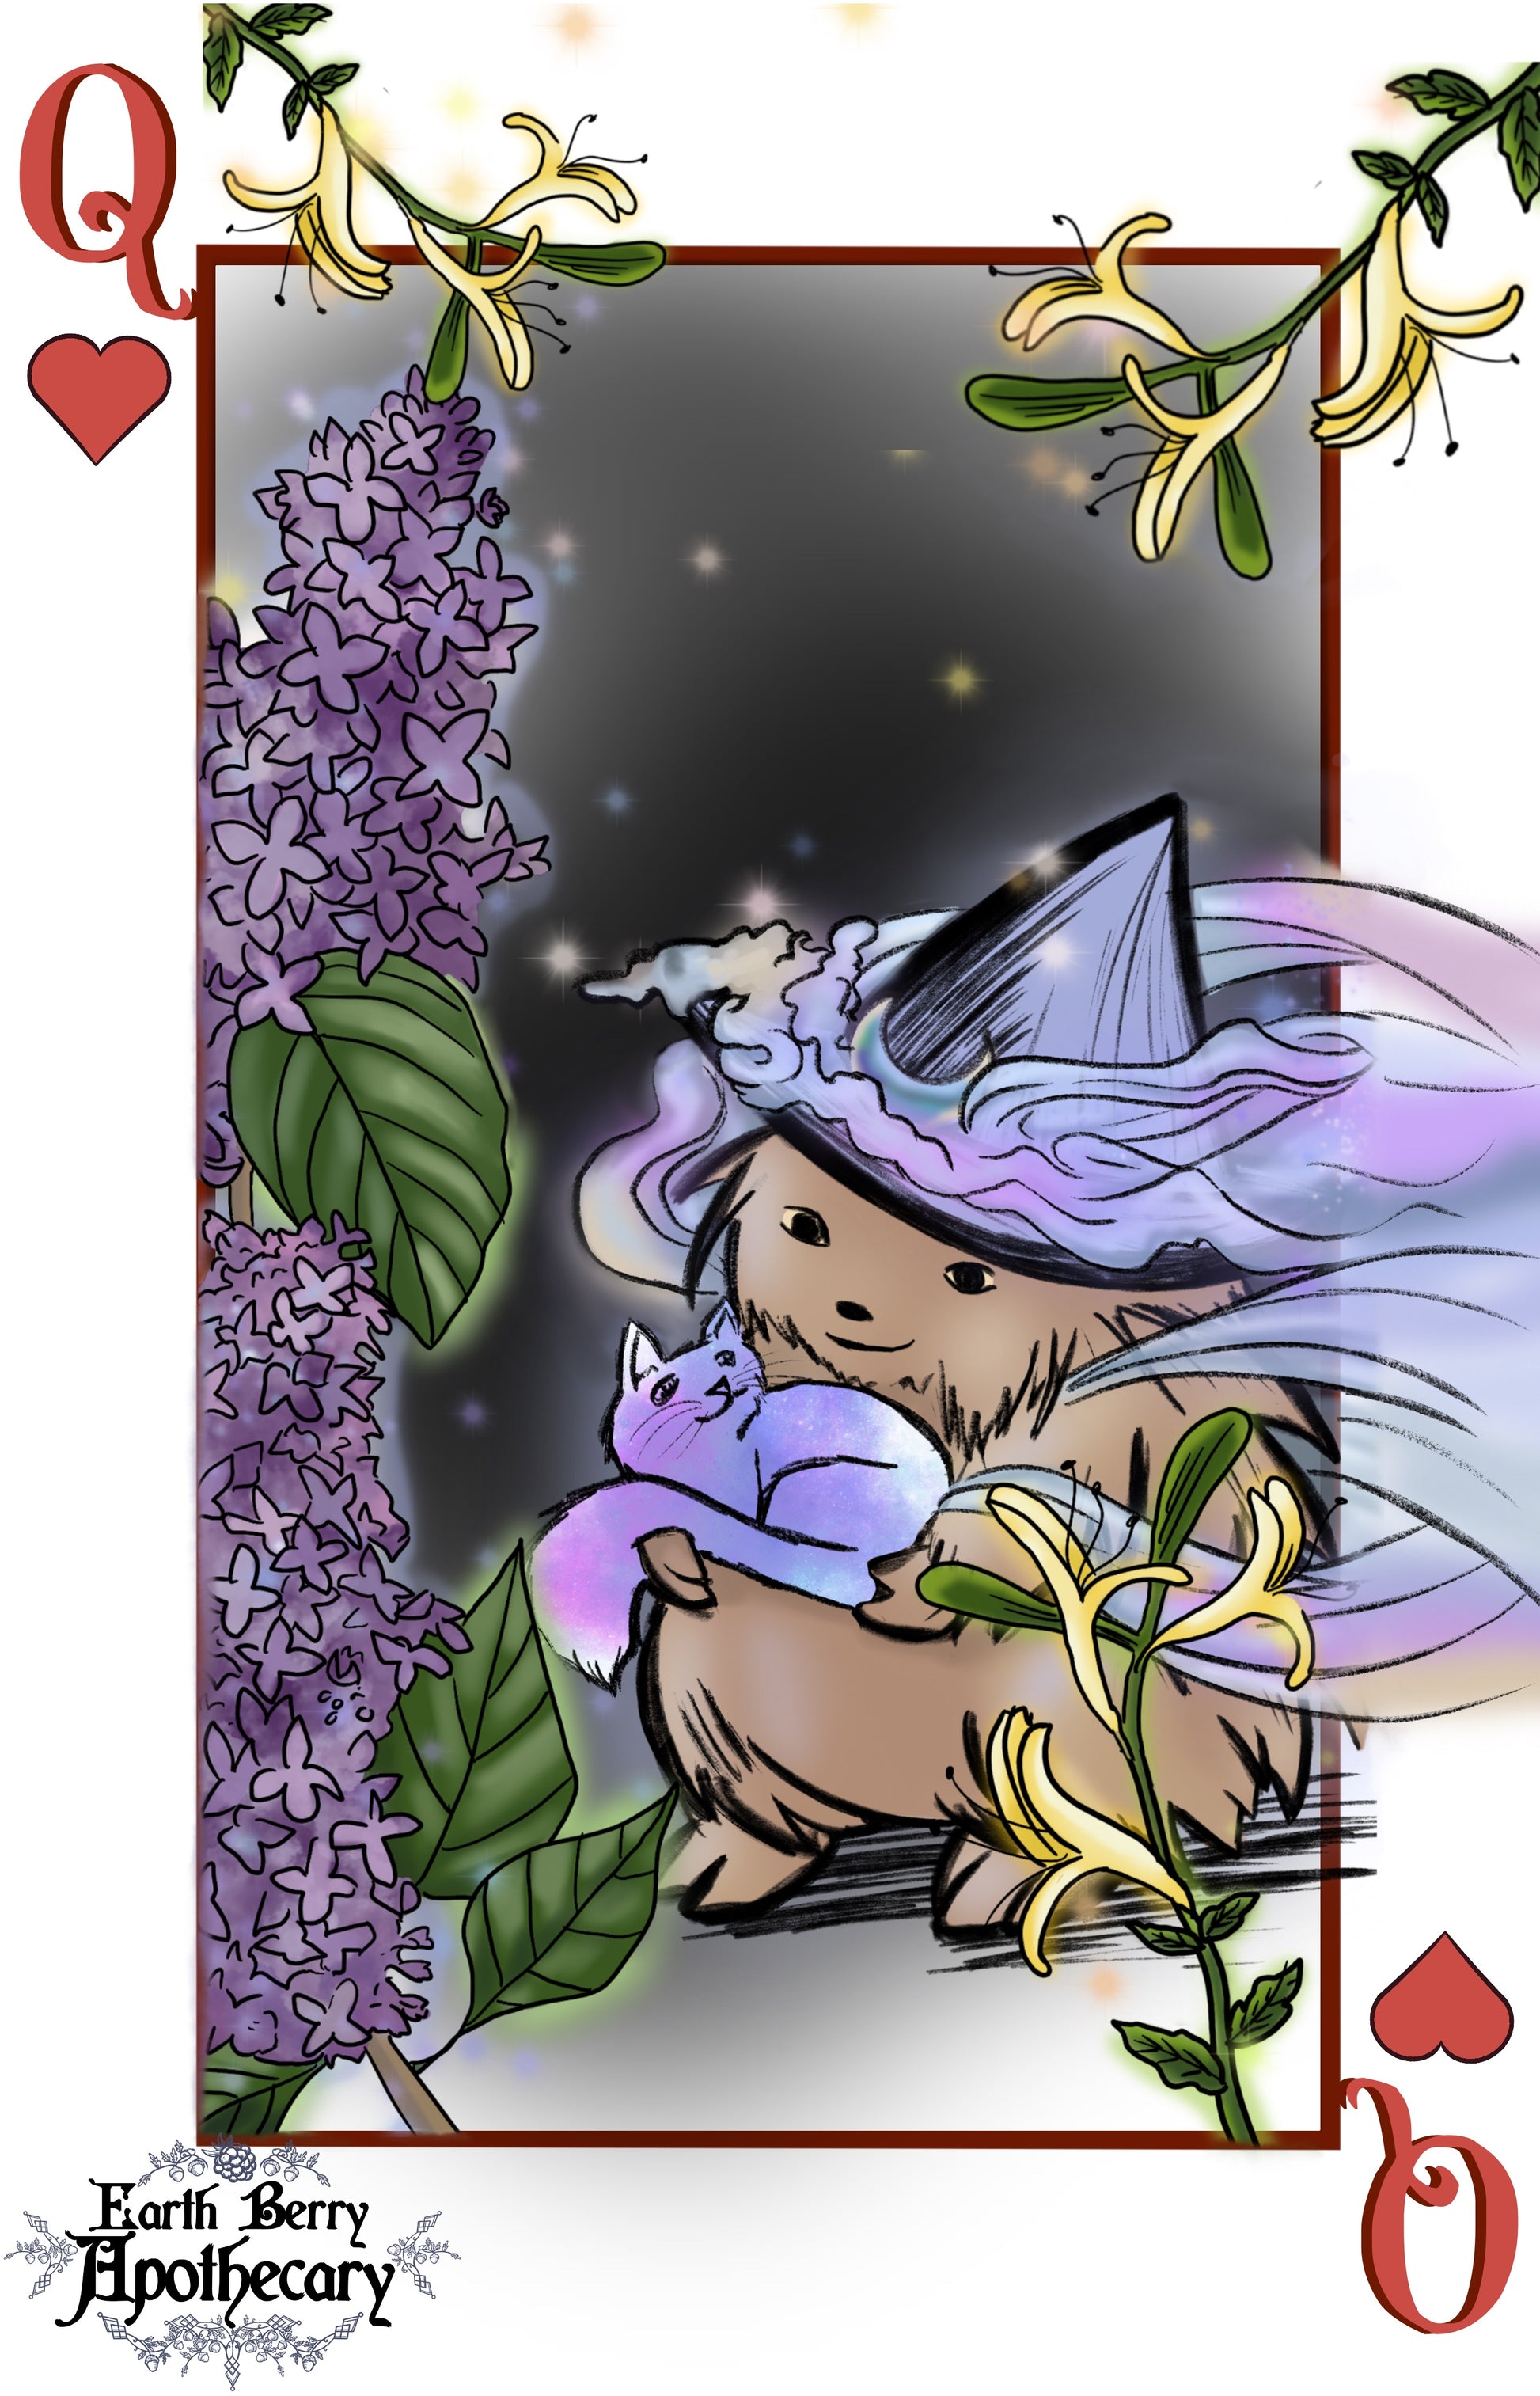 Fantasy themed playing cards. The queen of hearts playing card depicts the hedge witch dressed in glowing clouds. She holds a cosmic cat. Lilacs and honeysuckle grow around the borders.